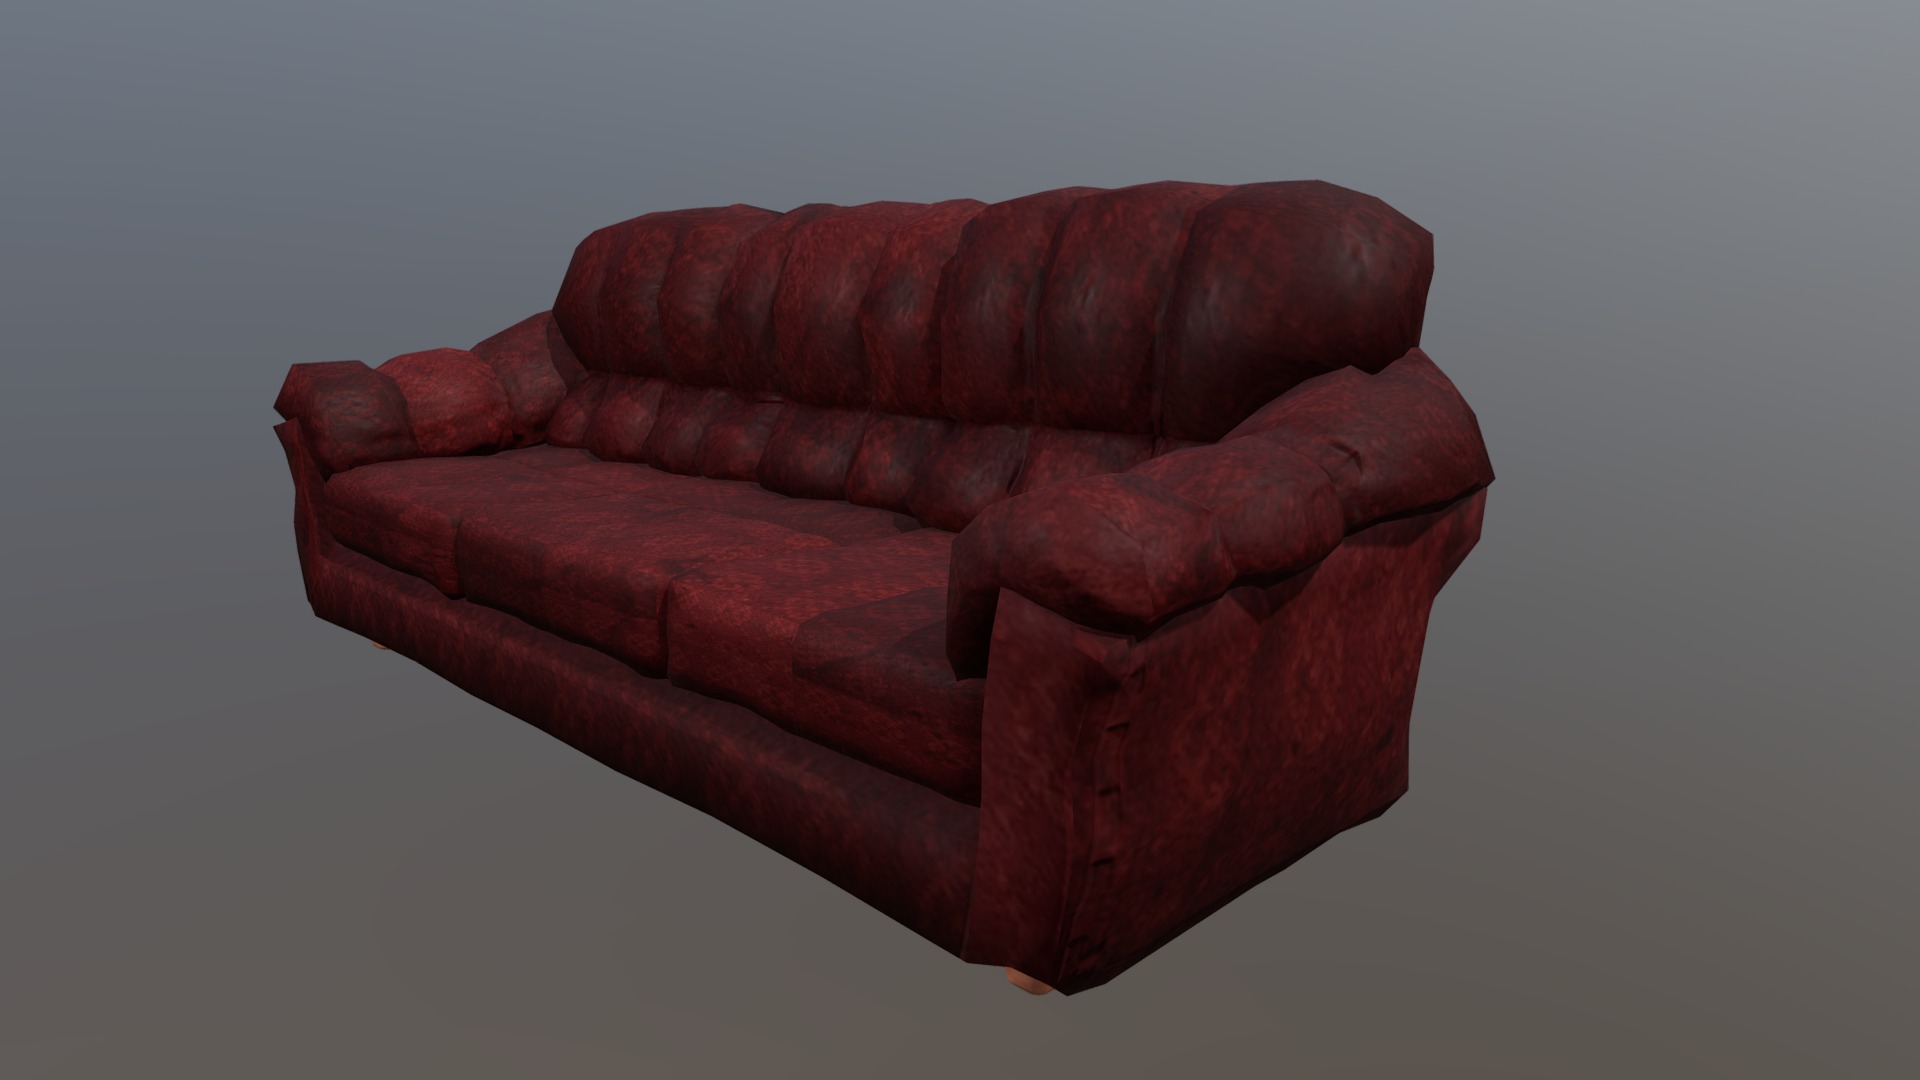 3D model Couch - This is a 3D model of the Couch. The 3D model is about a couch with a cushion.